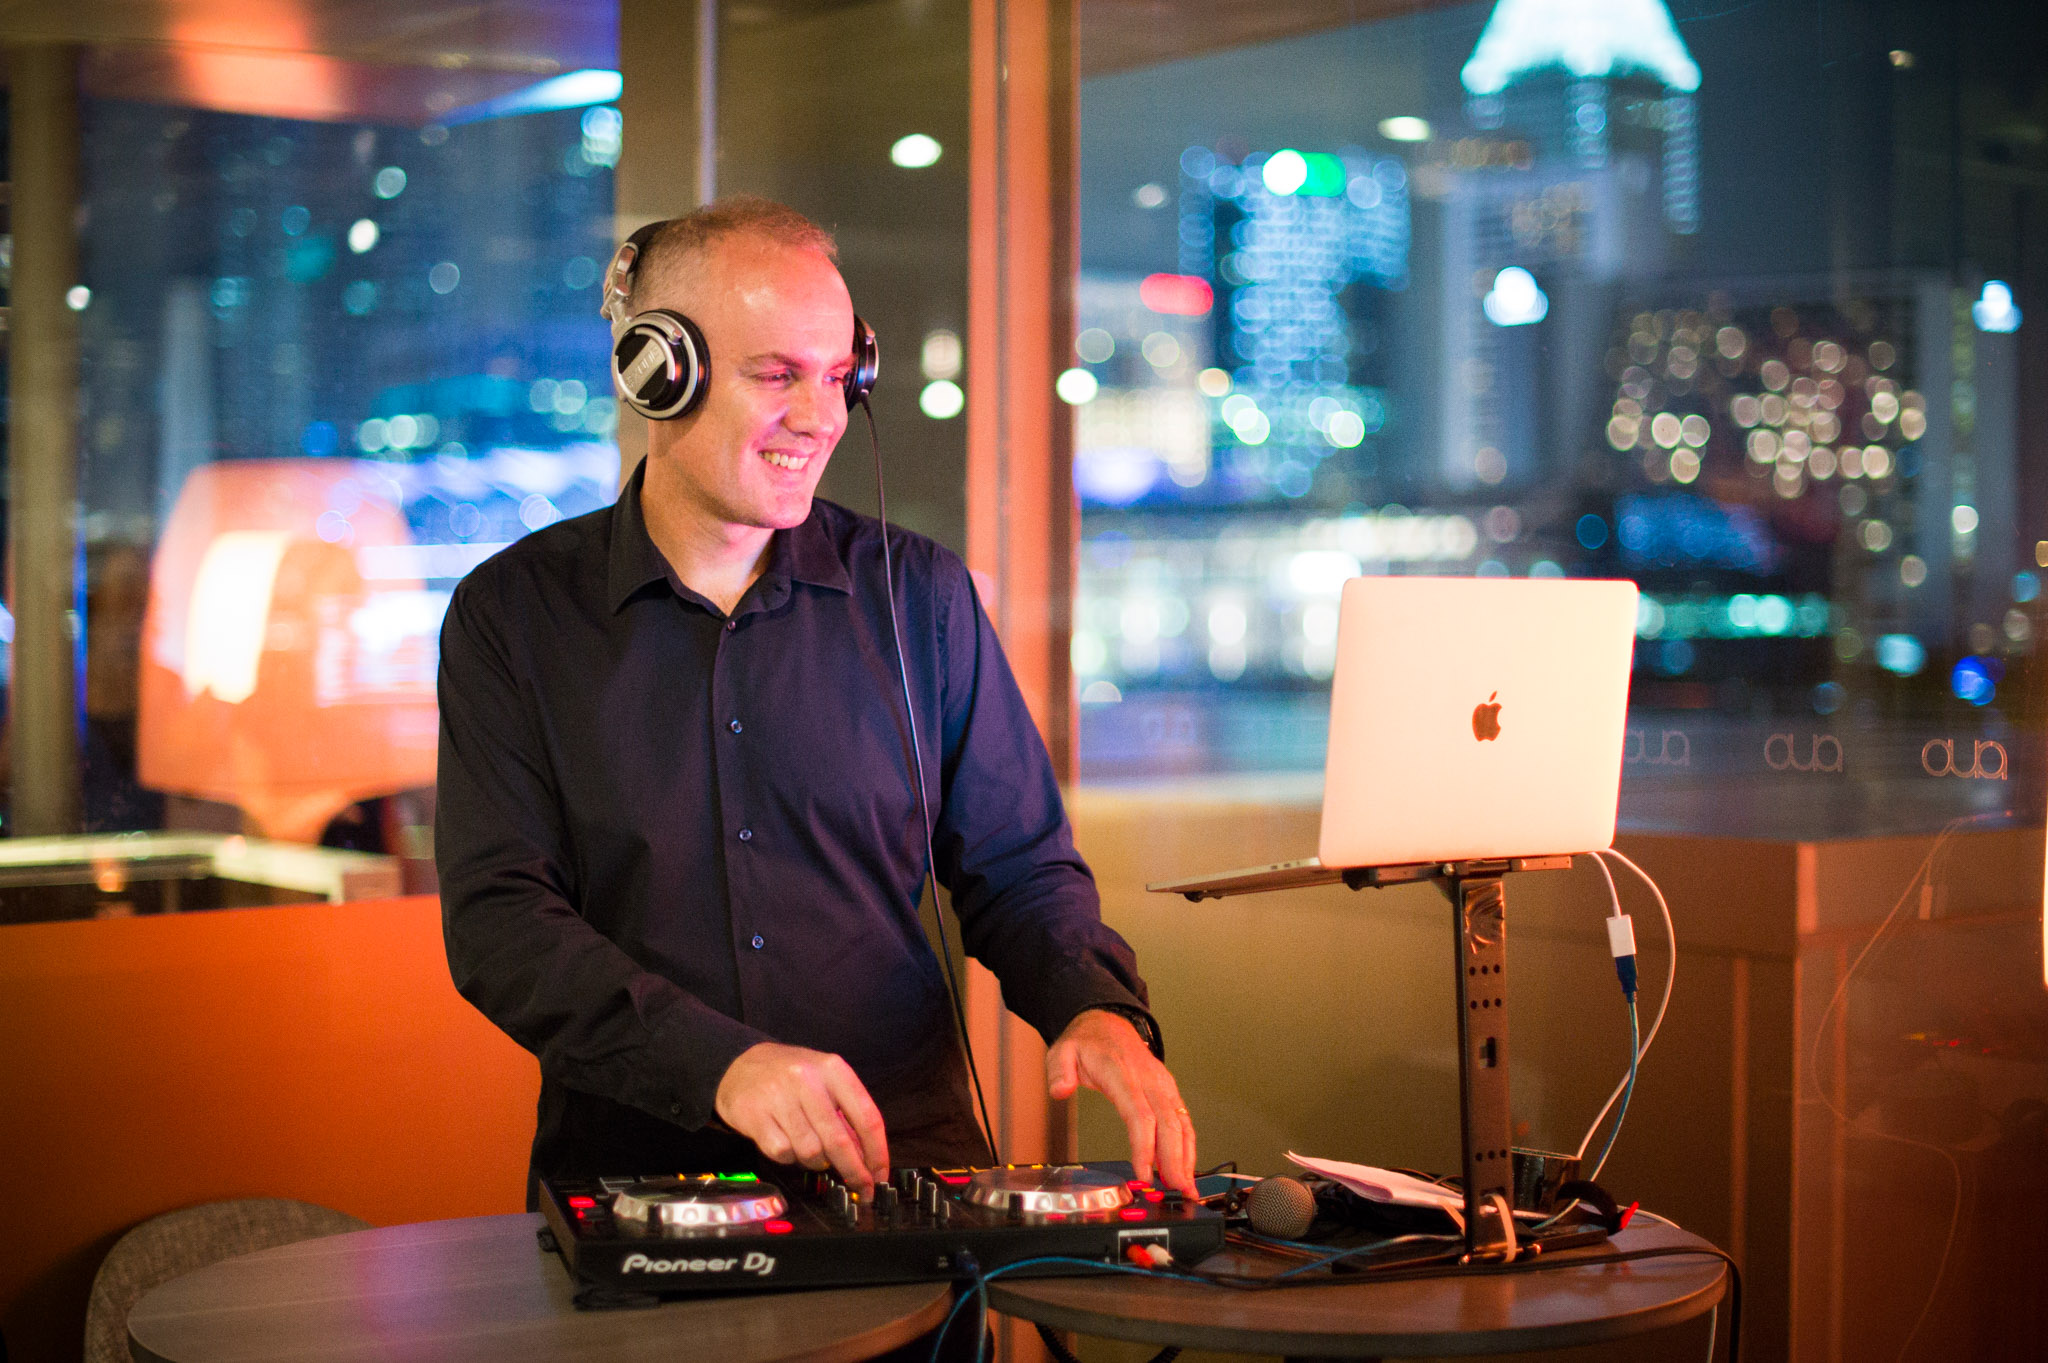 DJ playing music at a party